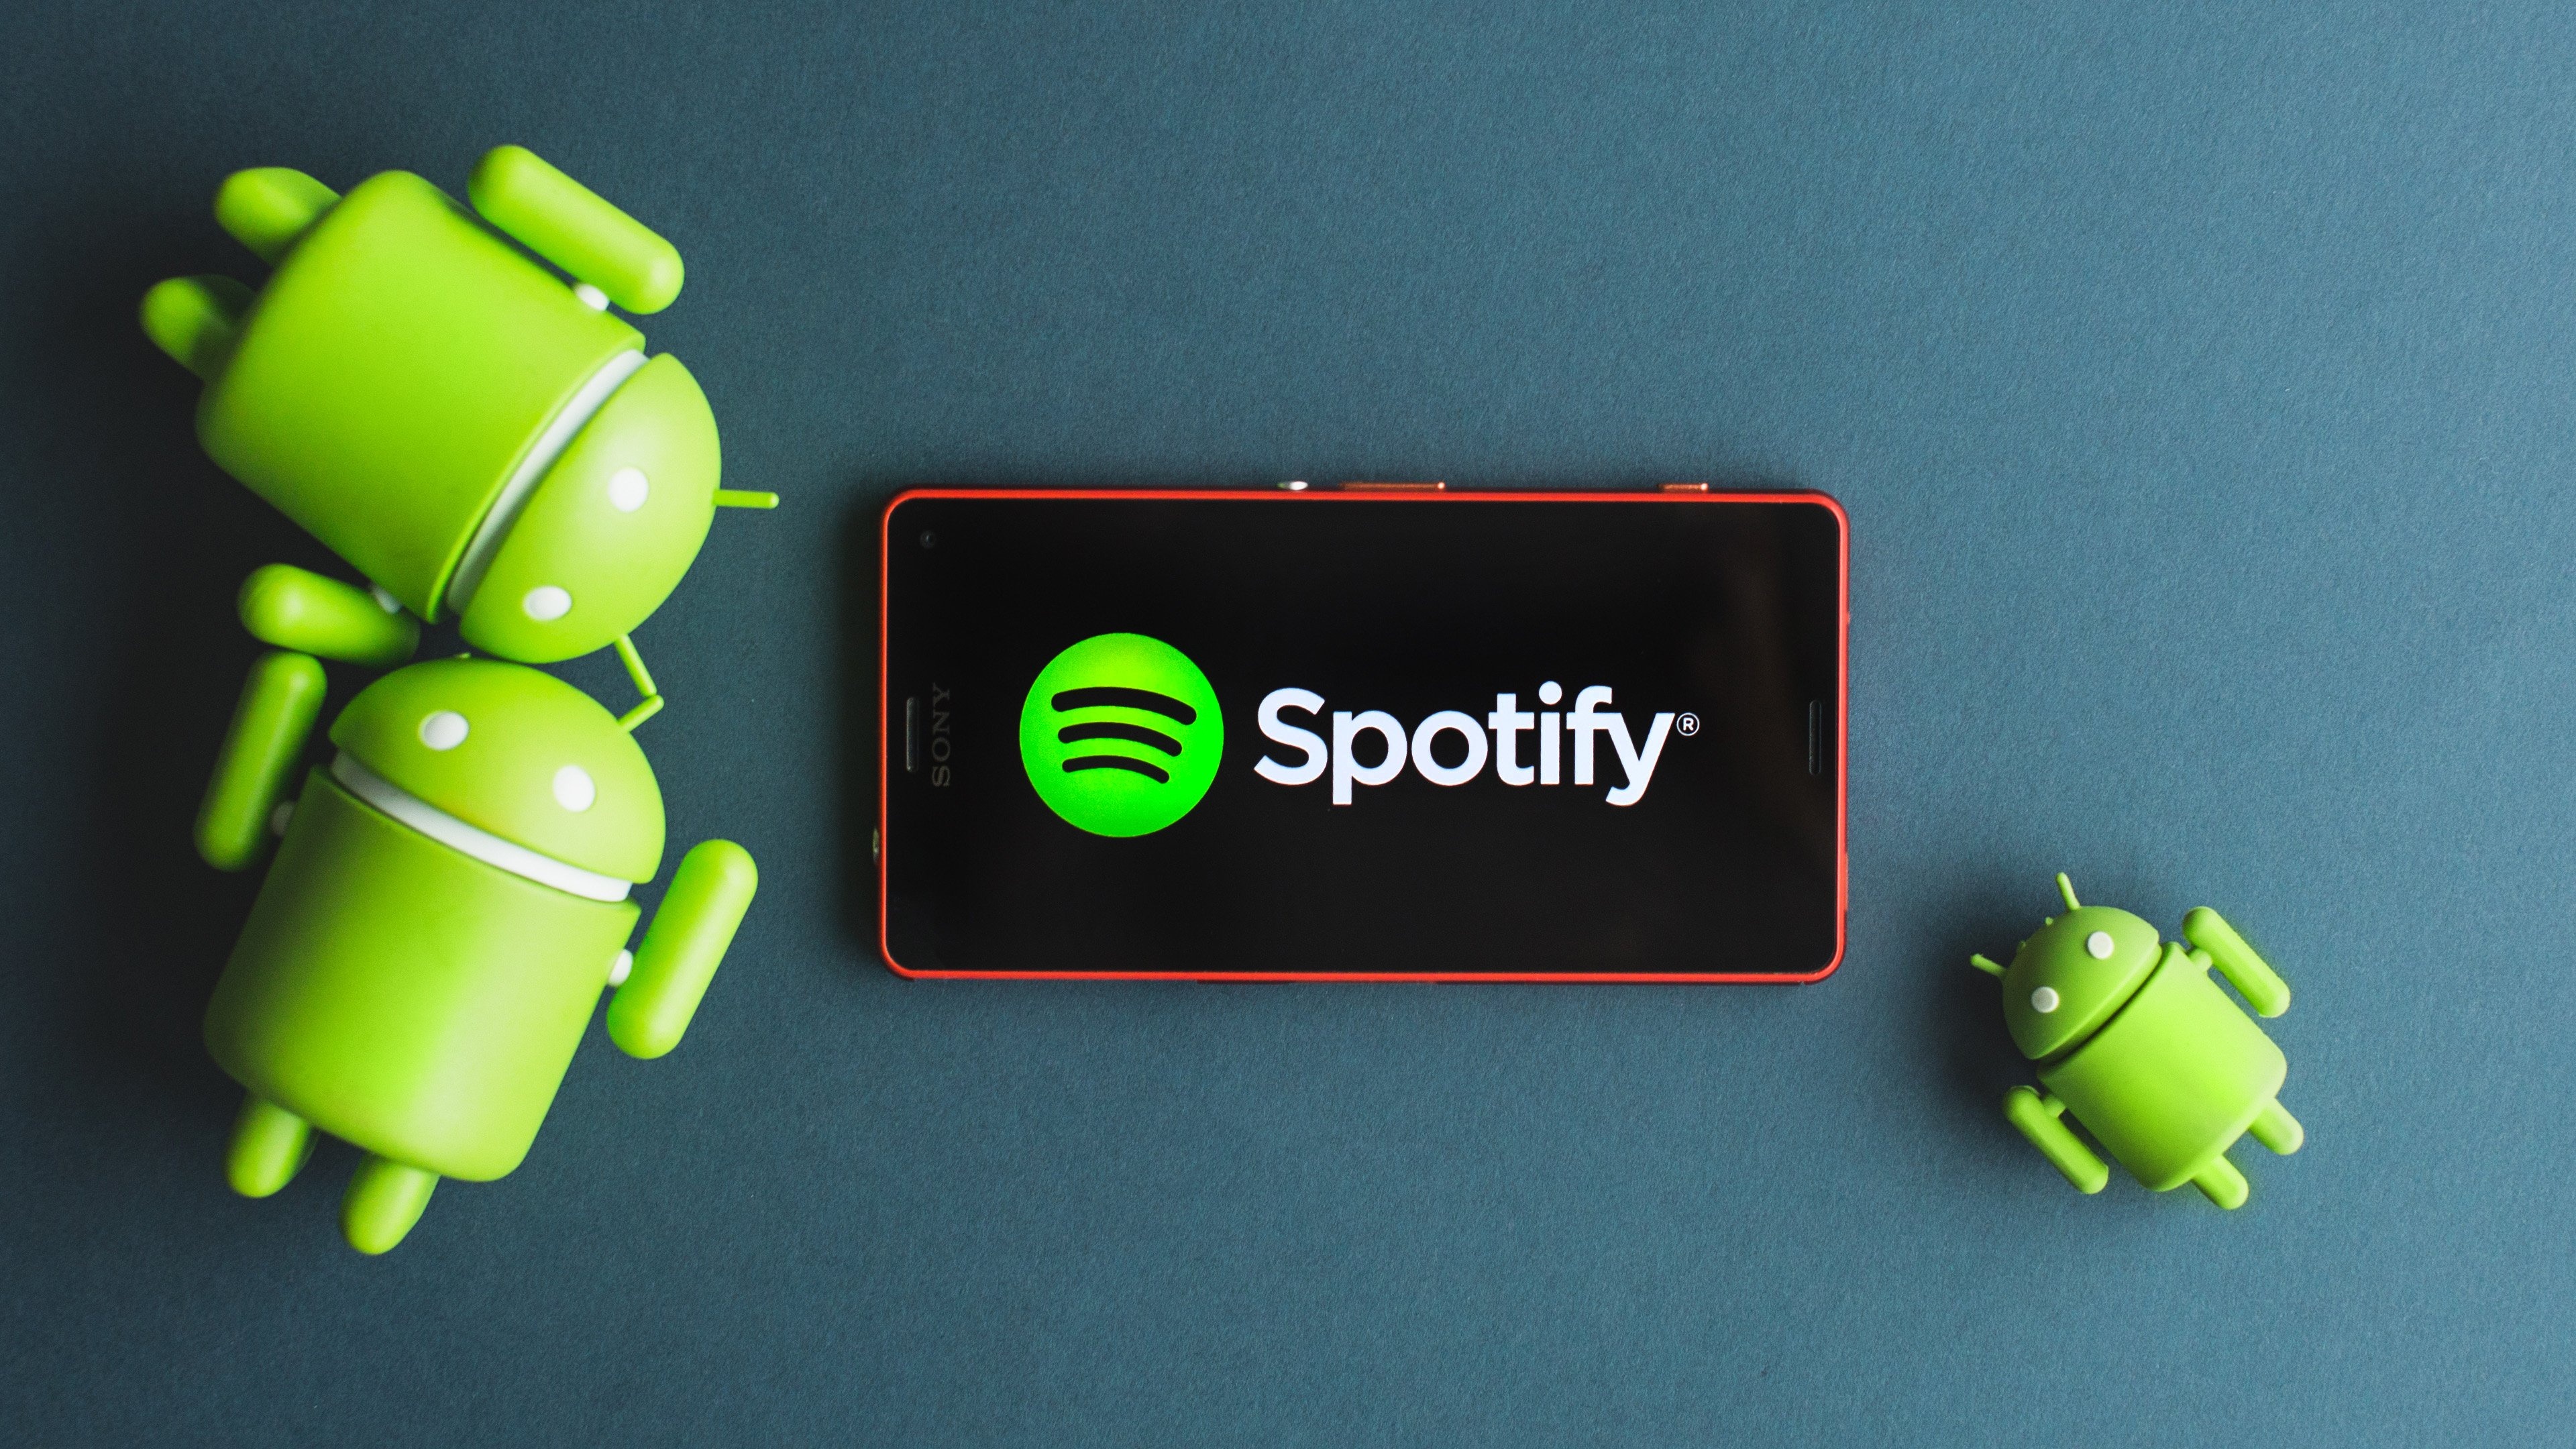 Spotify: One of the best music apps for Android, Access to the millions of songs. 3840x2160 4K Wallpaper.